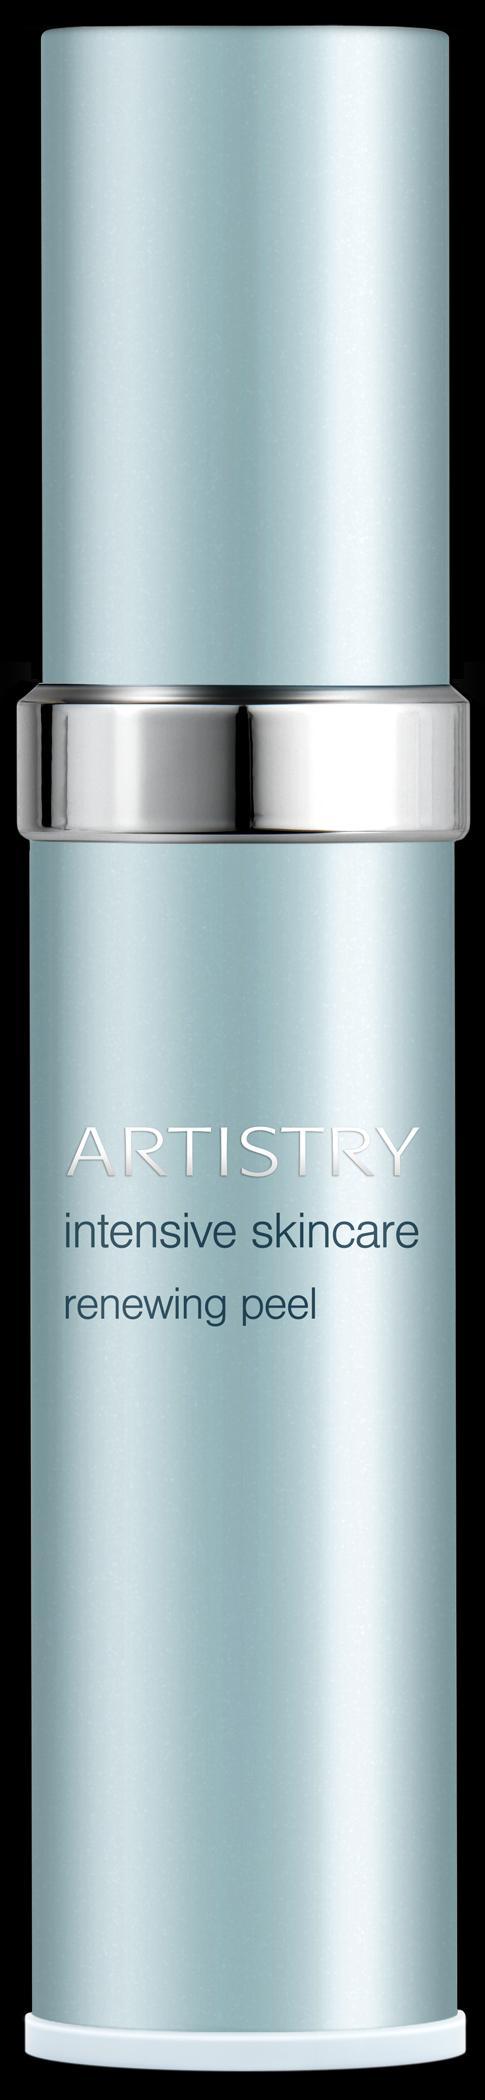 your own home. The ARTISTRY Renewing Peel is targeted to fight the visible signs of ageing.